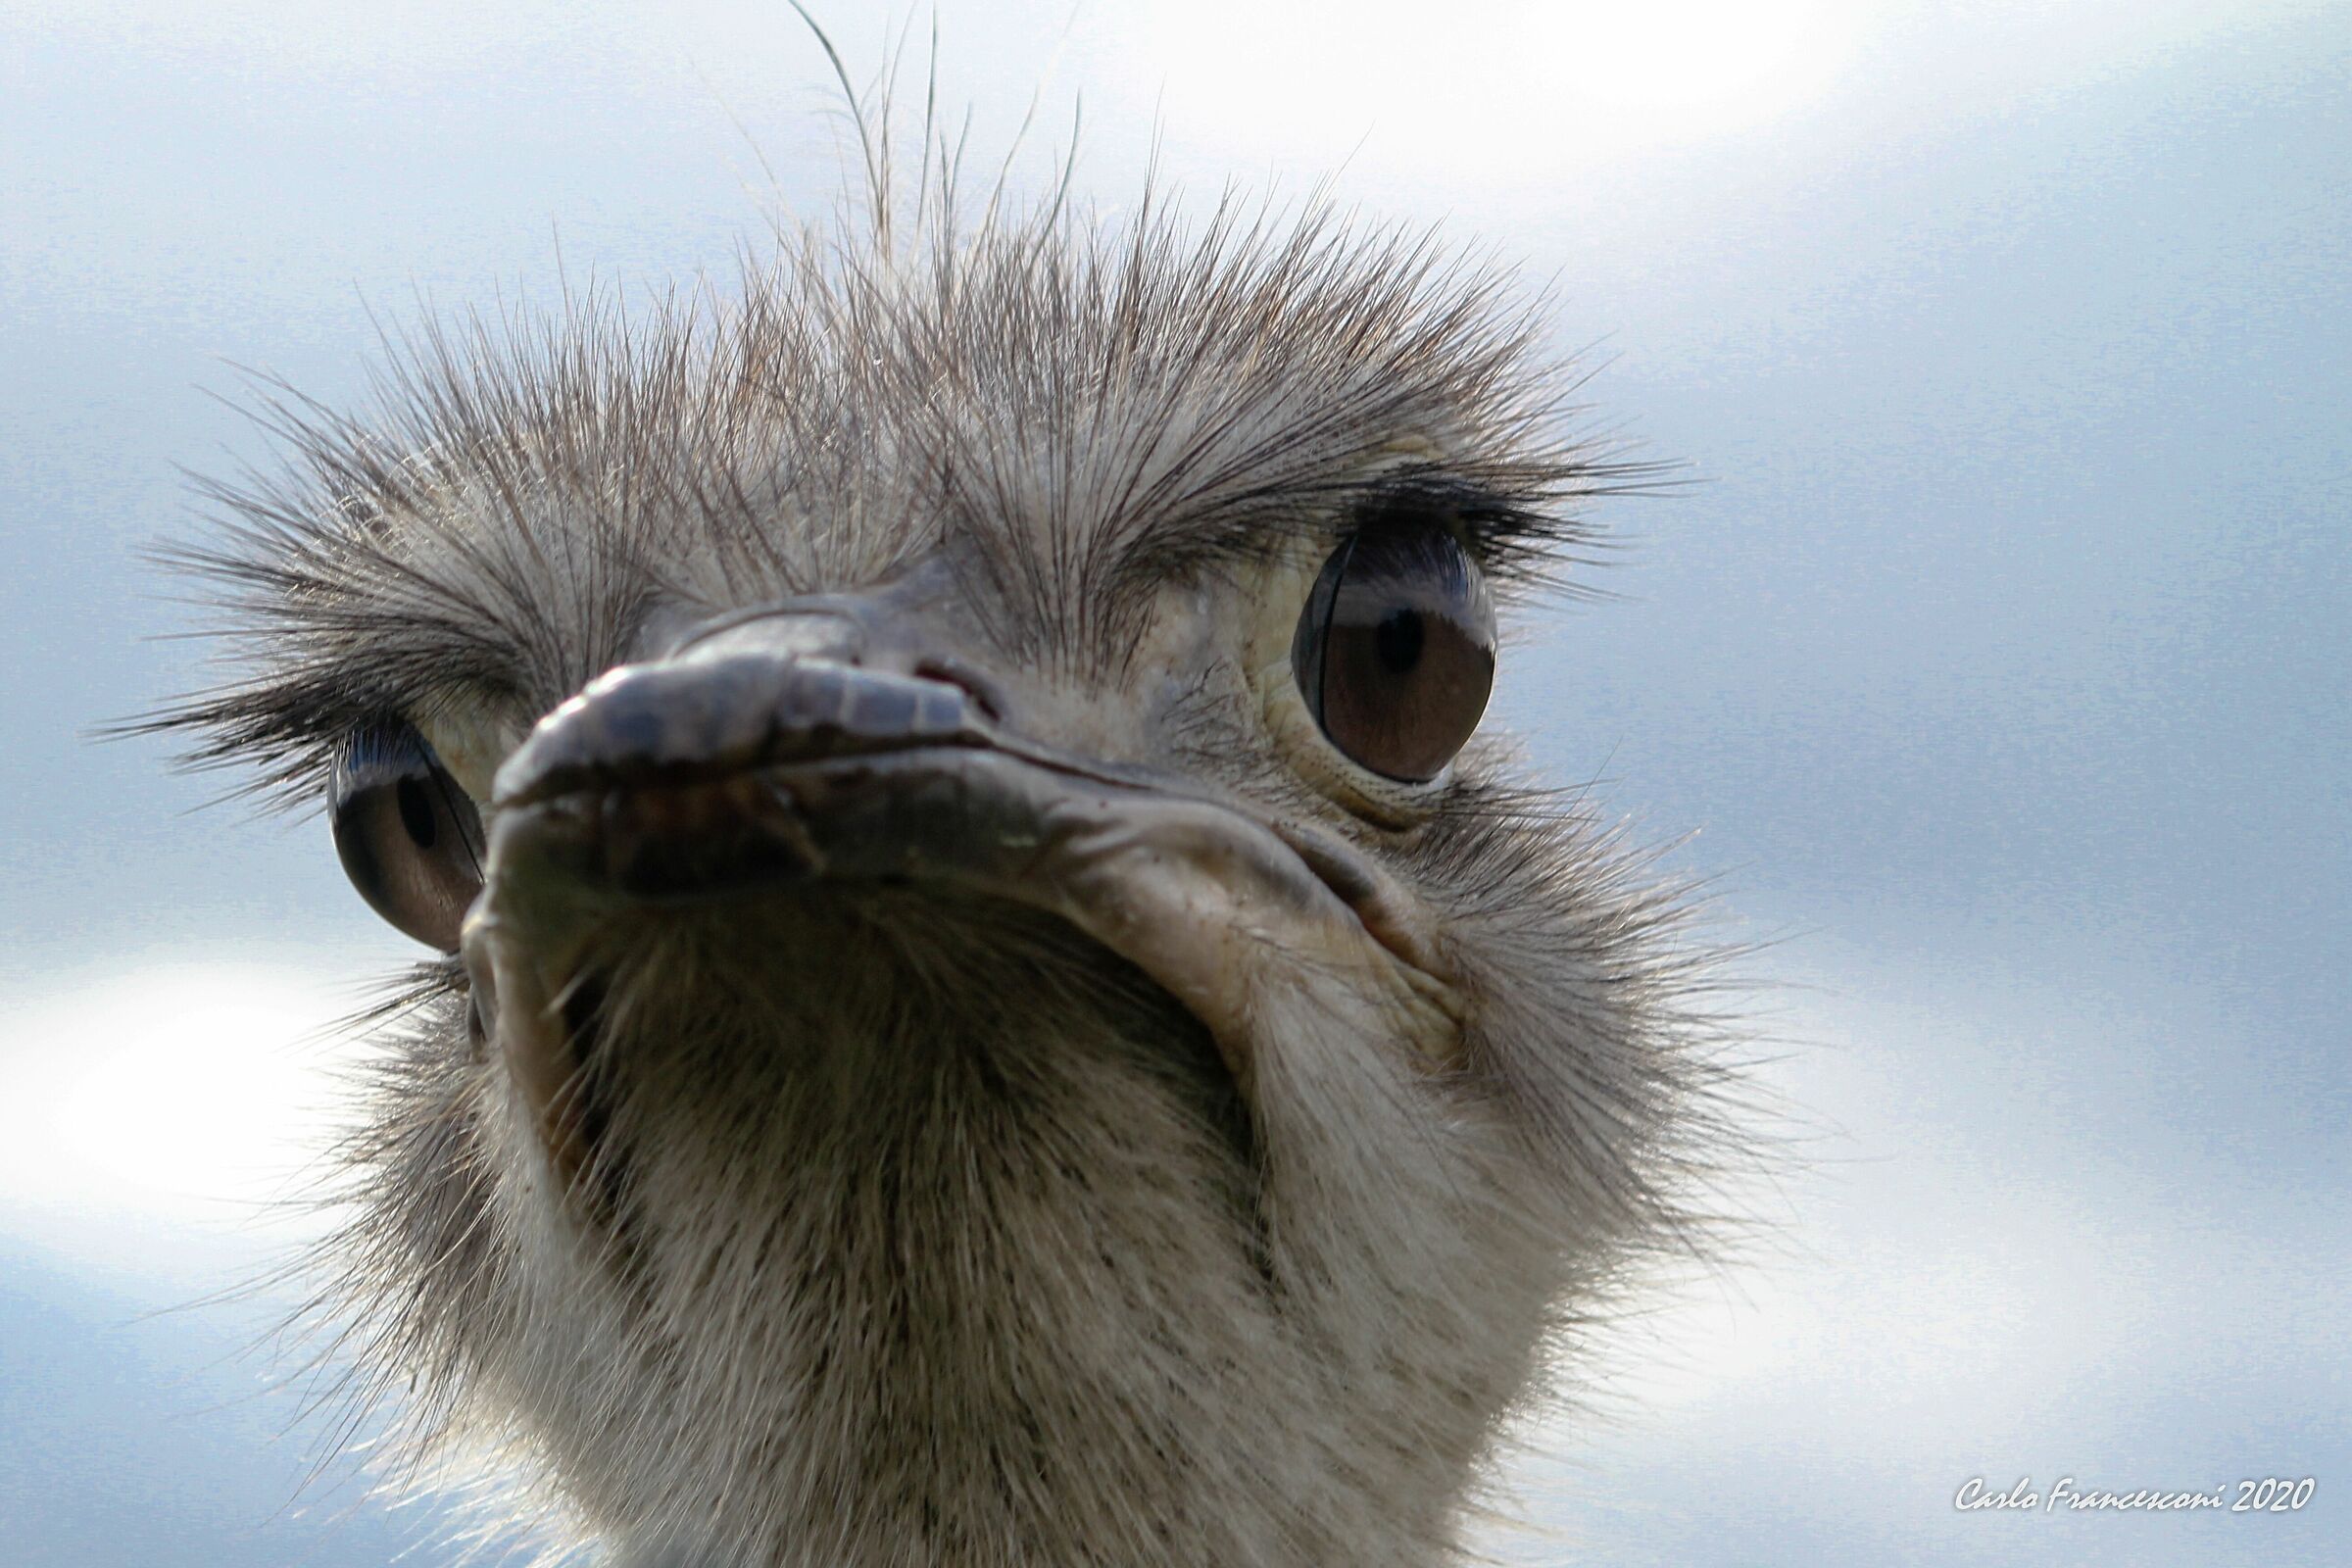 Increasingly curious ostrich...